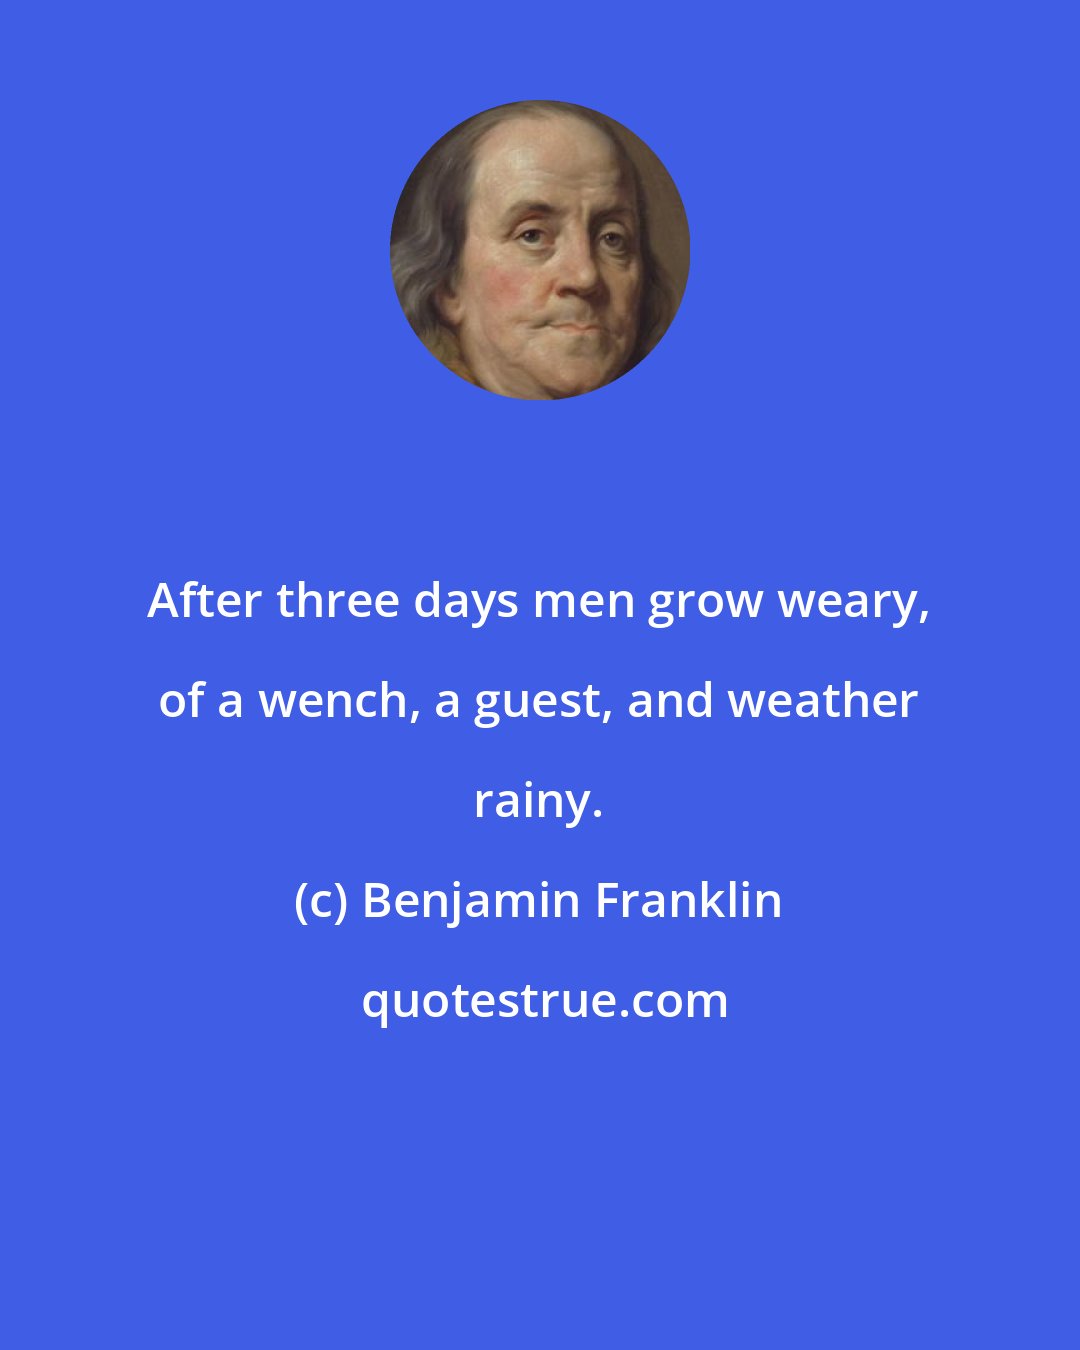 Benjamin Franklin: After three days men grow weary, of a wench, a guest, and weather rainy.